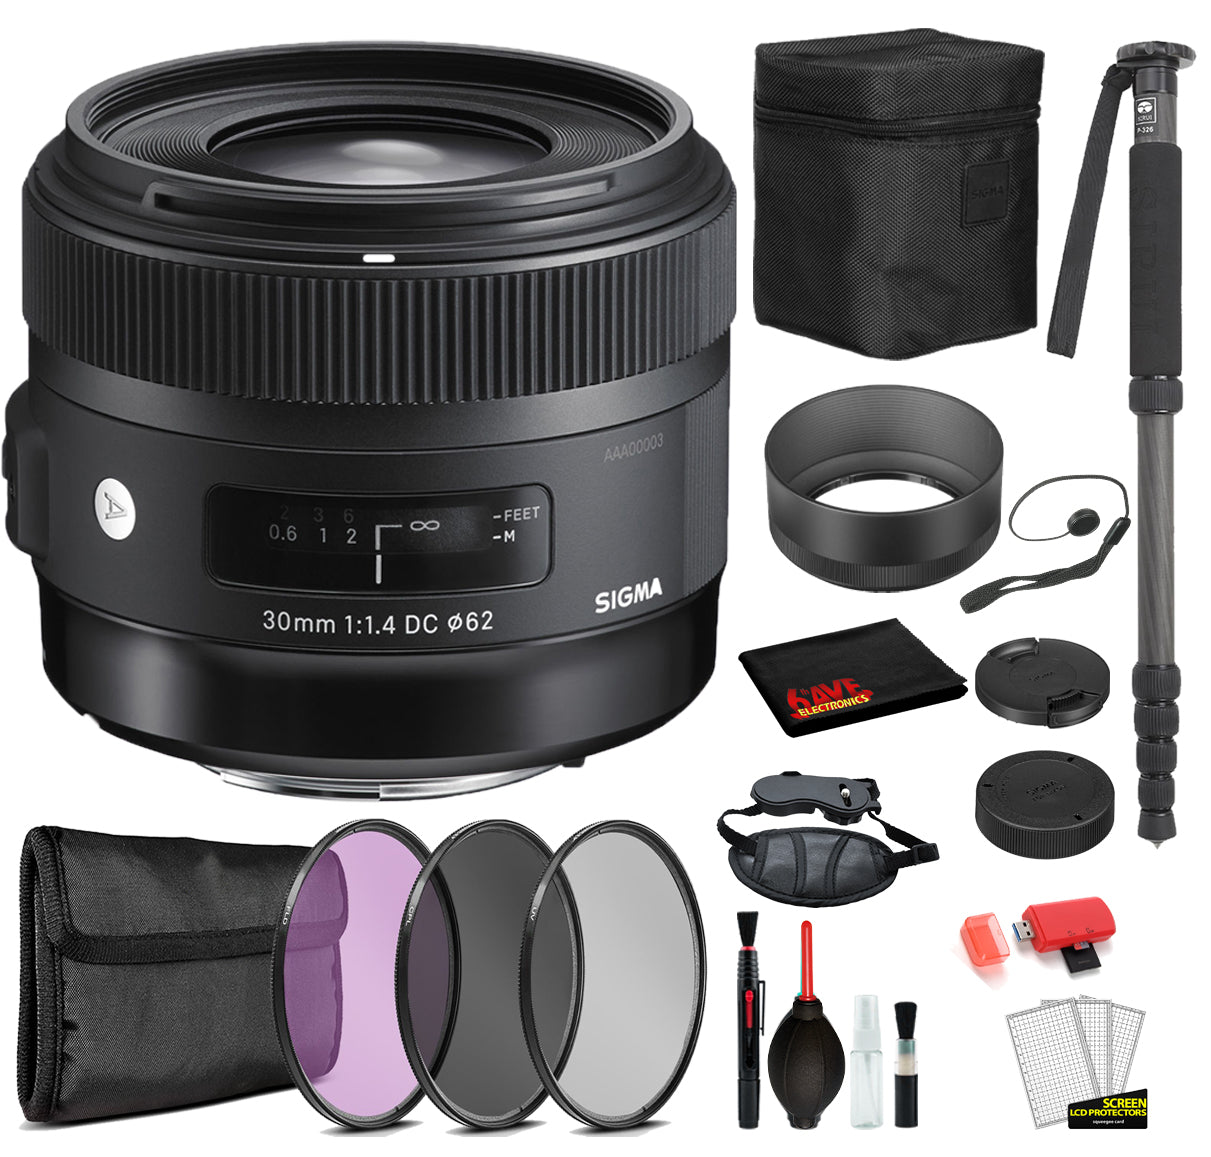 Sigma 30mm f/1.4 DC HSM Art Lens for Nikon F with Bundle Includes: Pro Series Monopod, 3PC Filter Kit + More